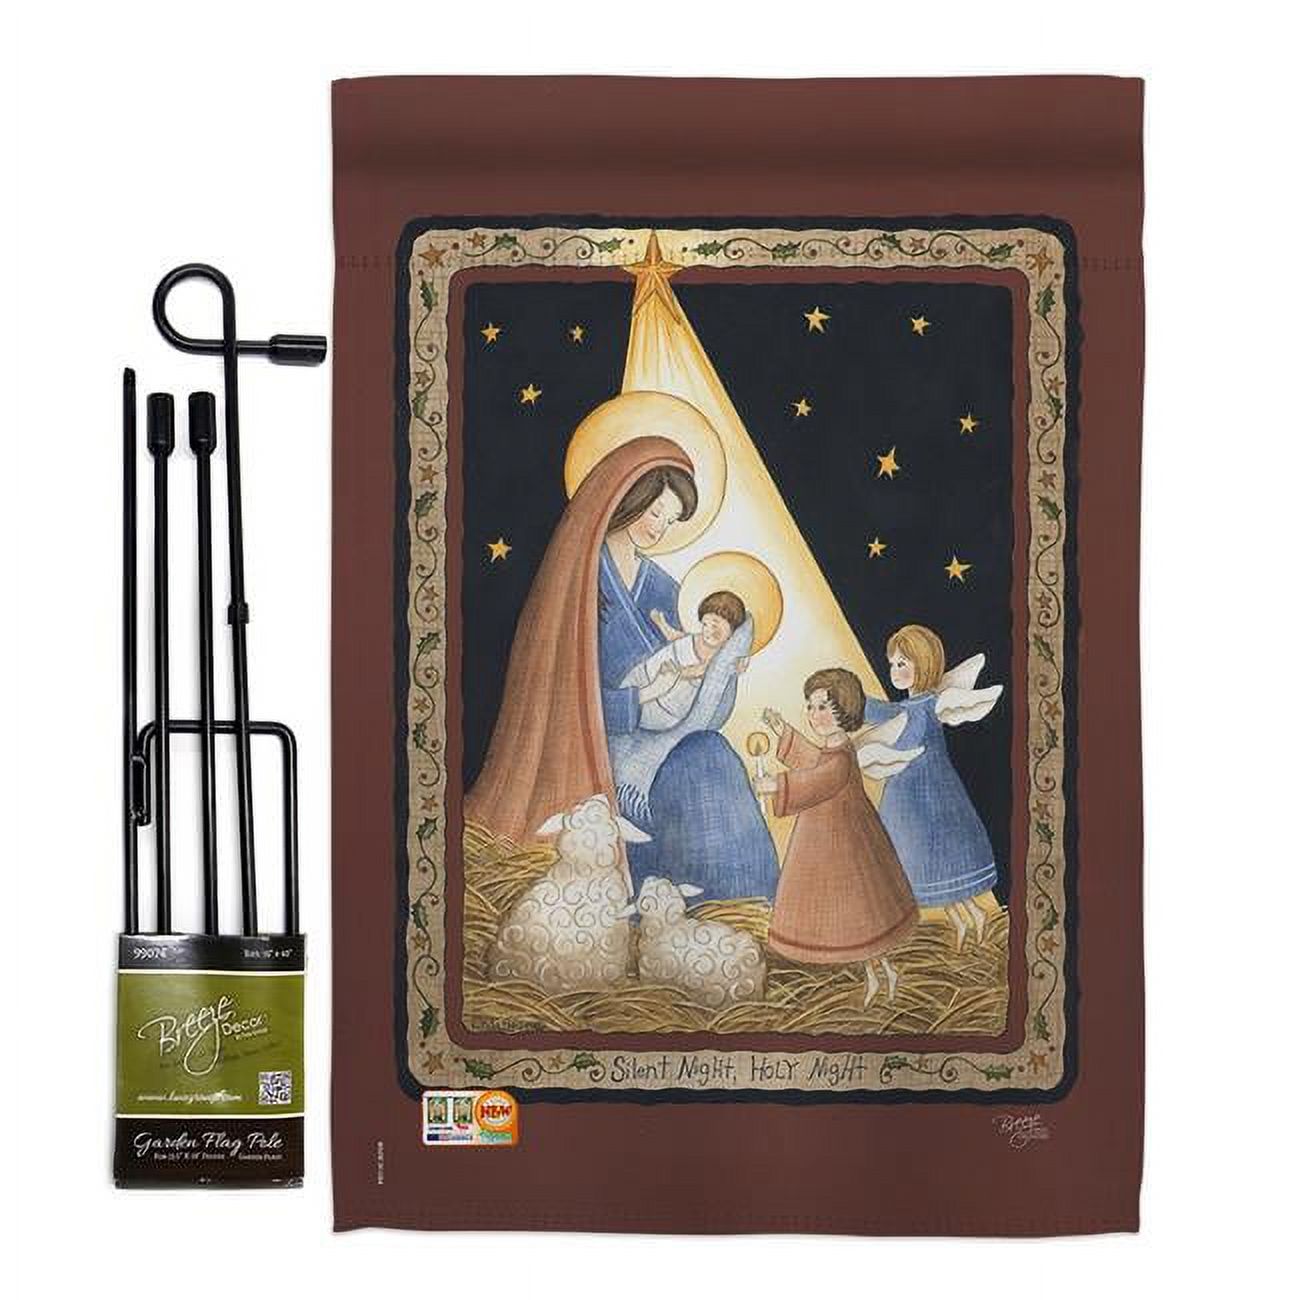 Breeze Decor BD-NT-GS-114091-IP-BO-D-US12-PL 13 x 18.5 in. the Lord is Born Winter Nativity Impressions Decorative Vertical Double Sided Garden Flag Set with Banner Pole - image 1 of 1